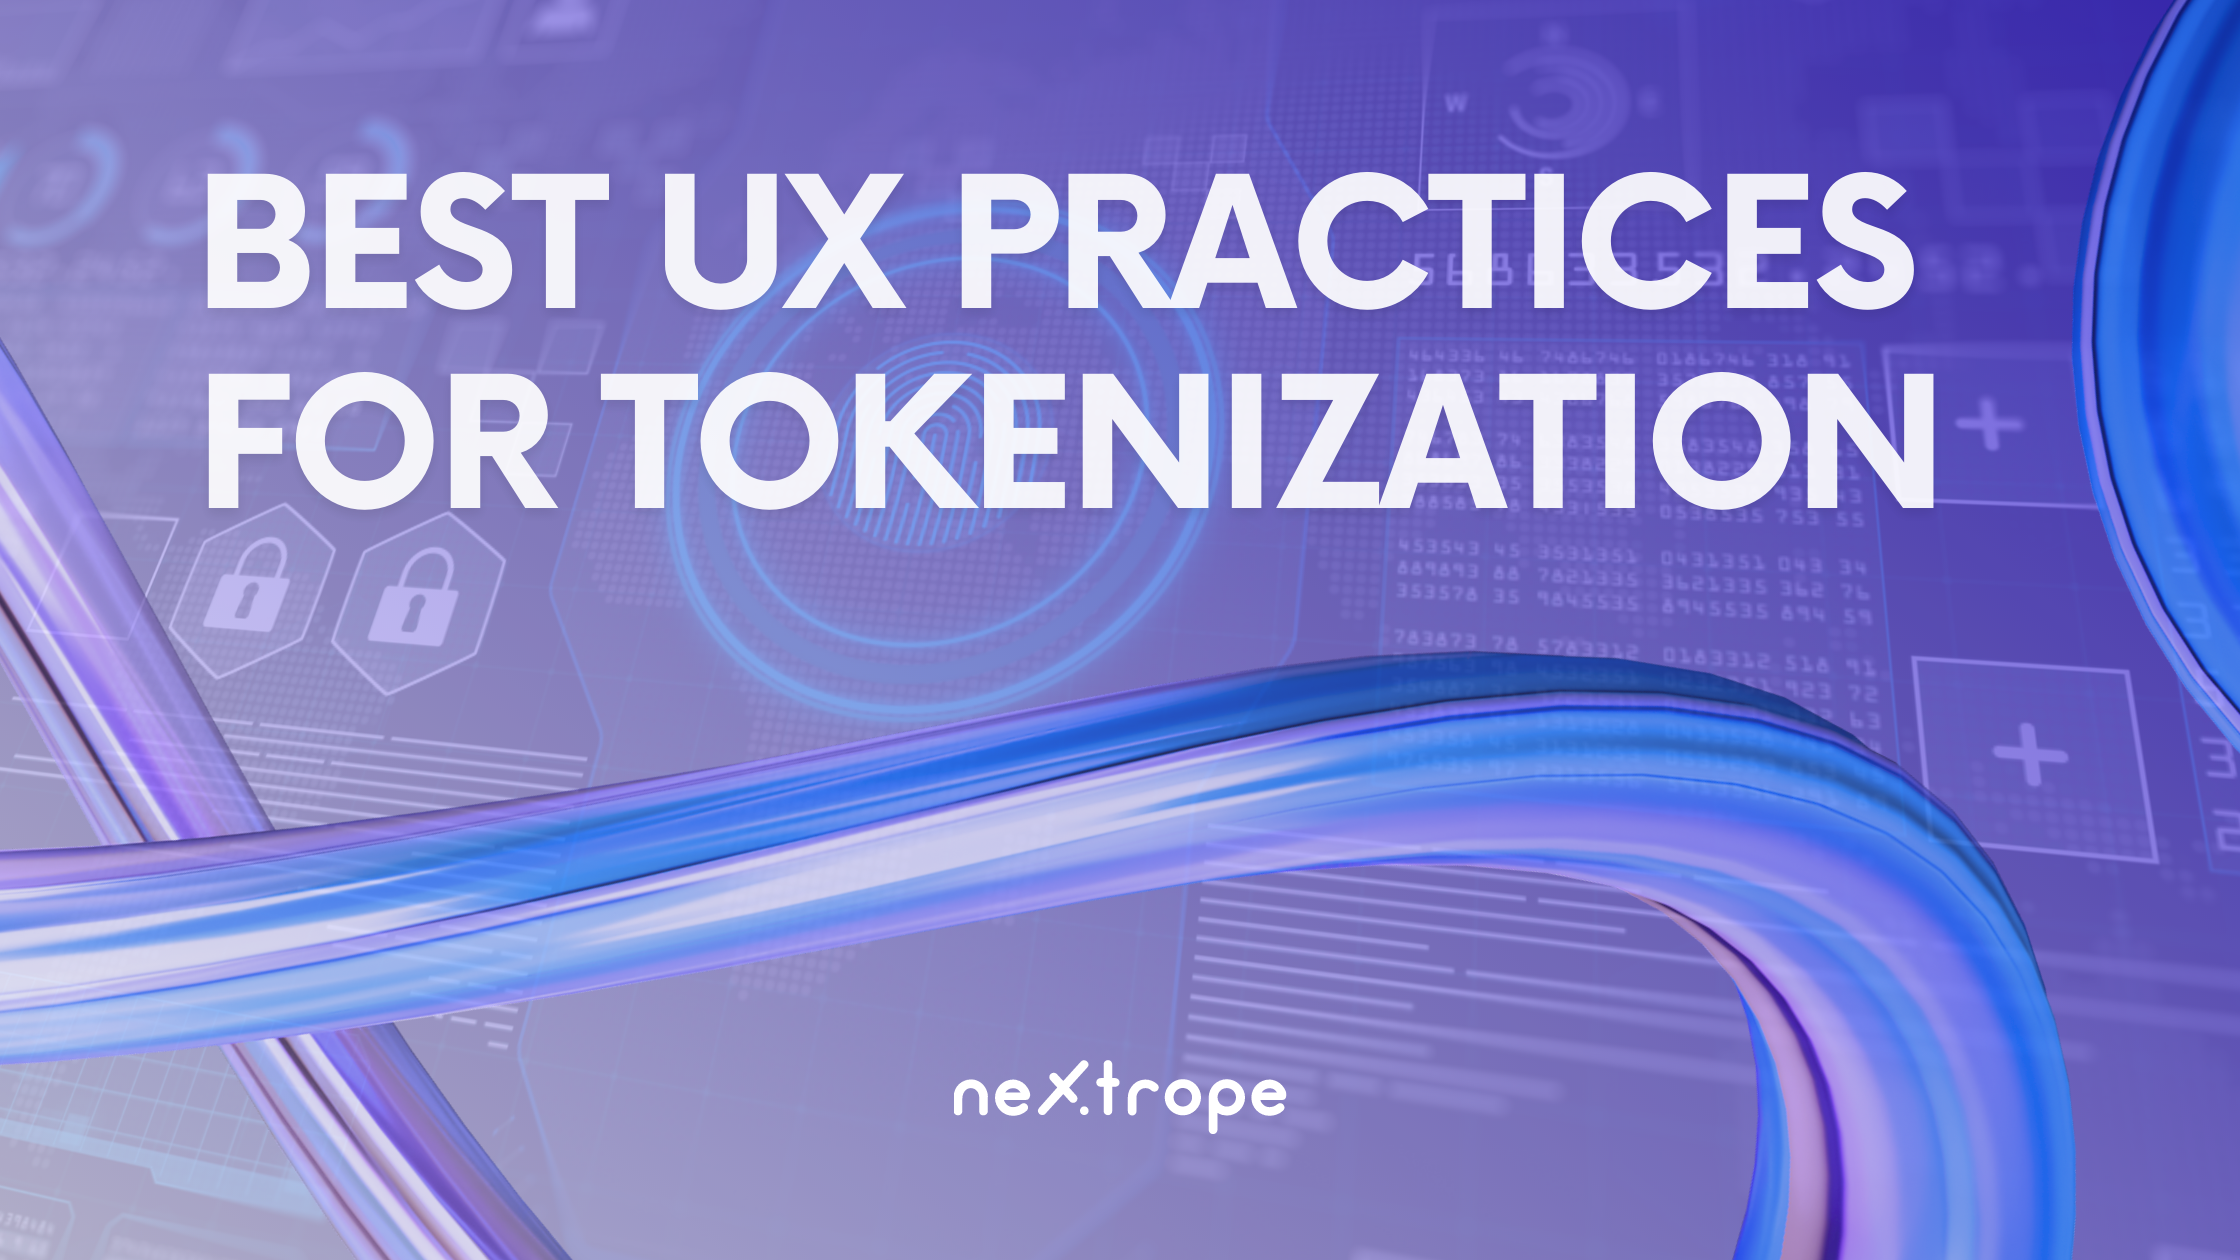 Best UX Practices for Tokenization